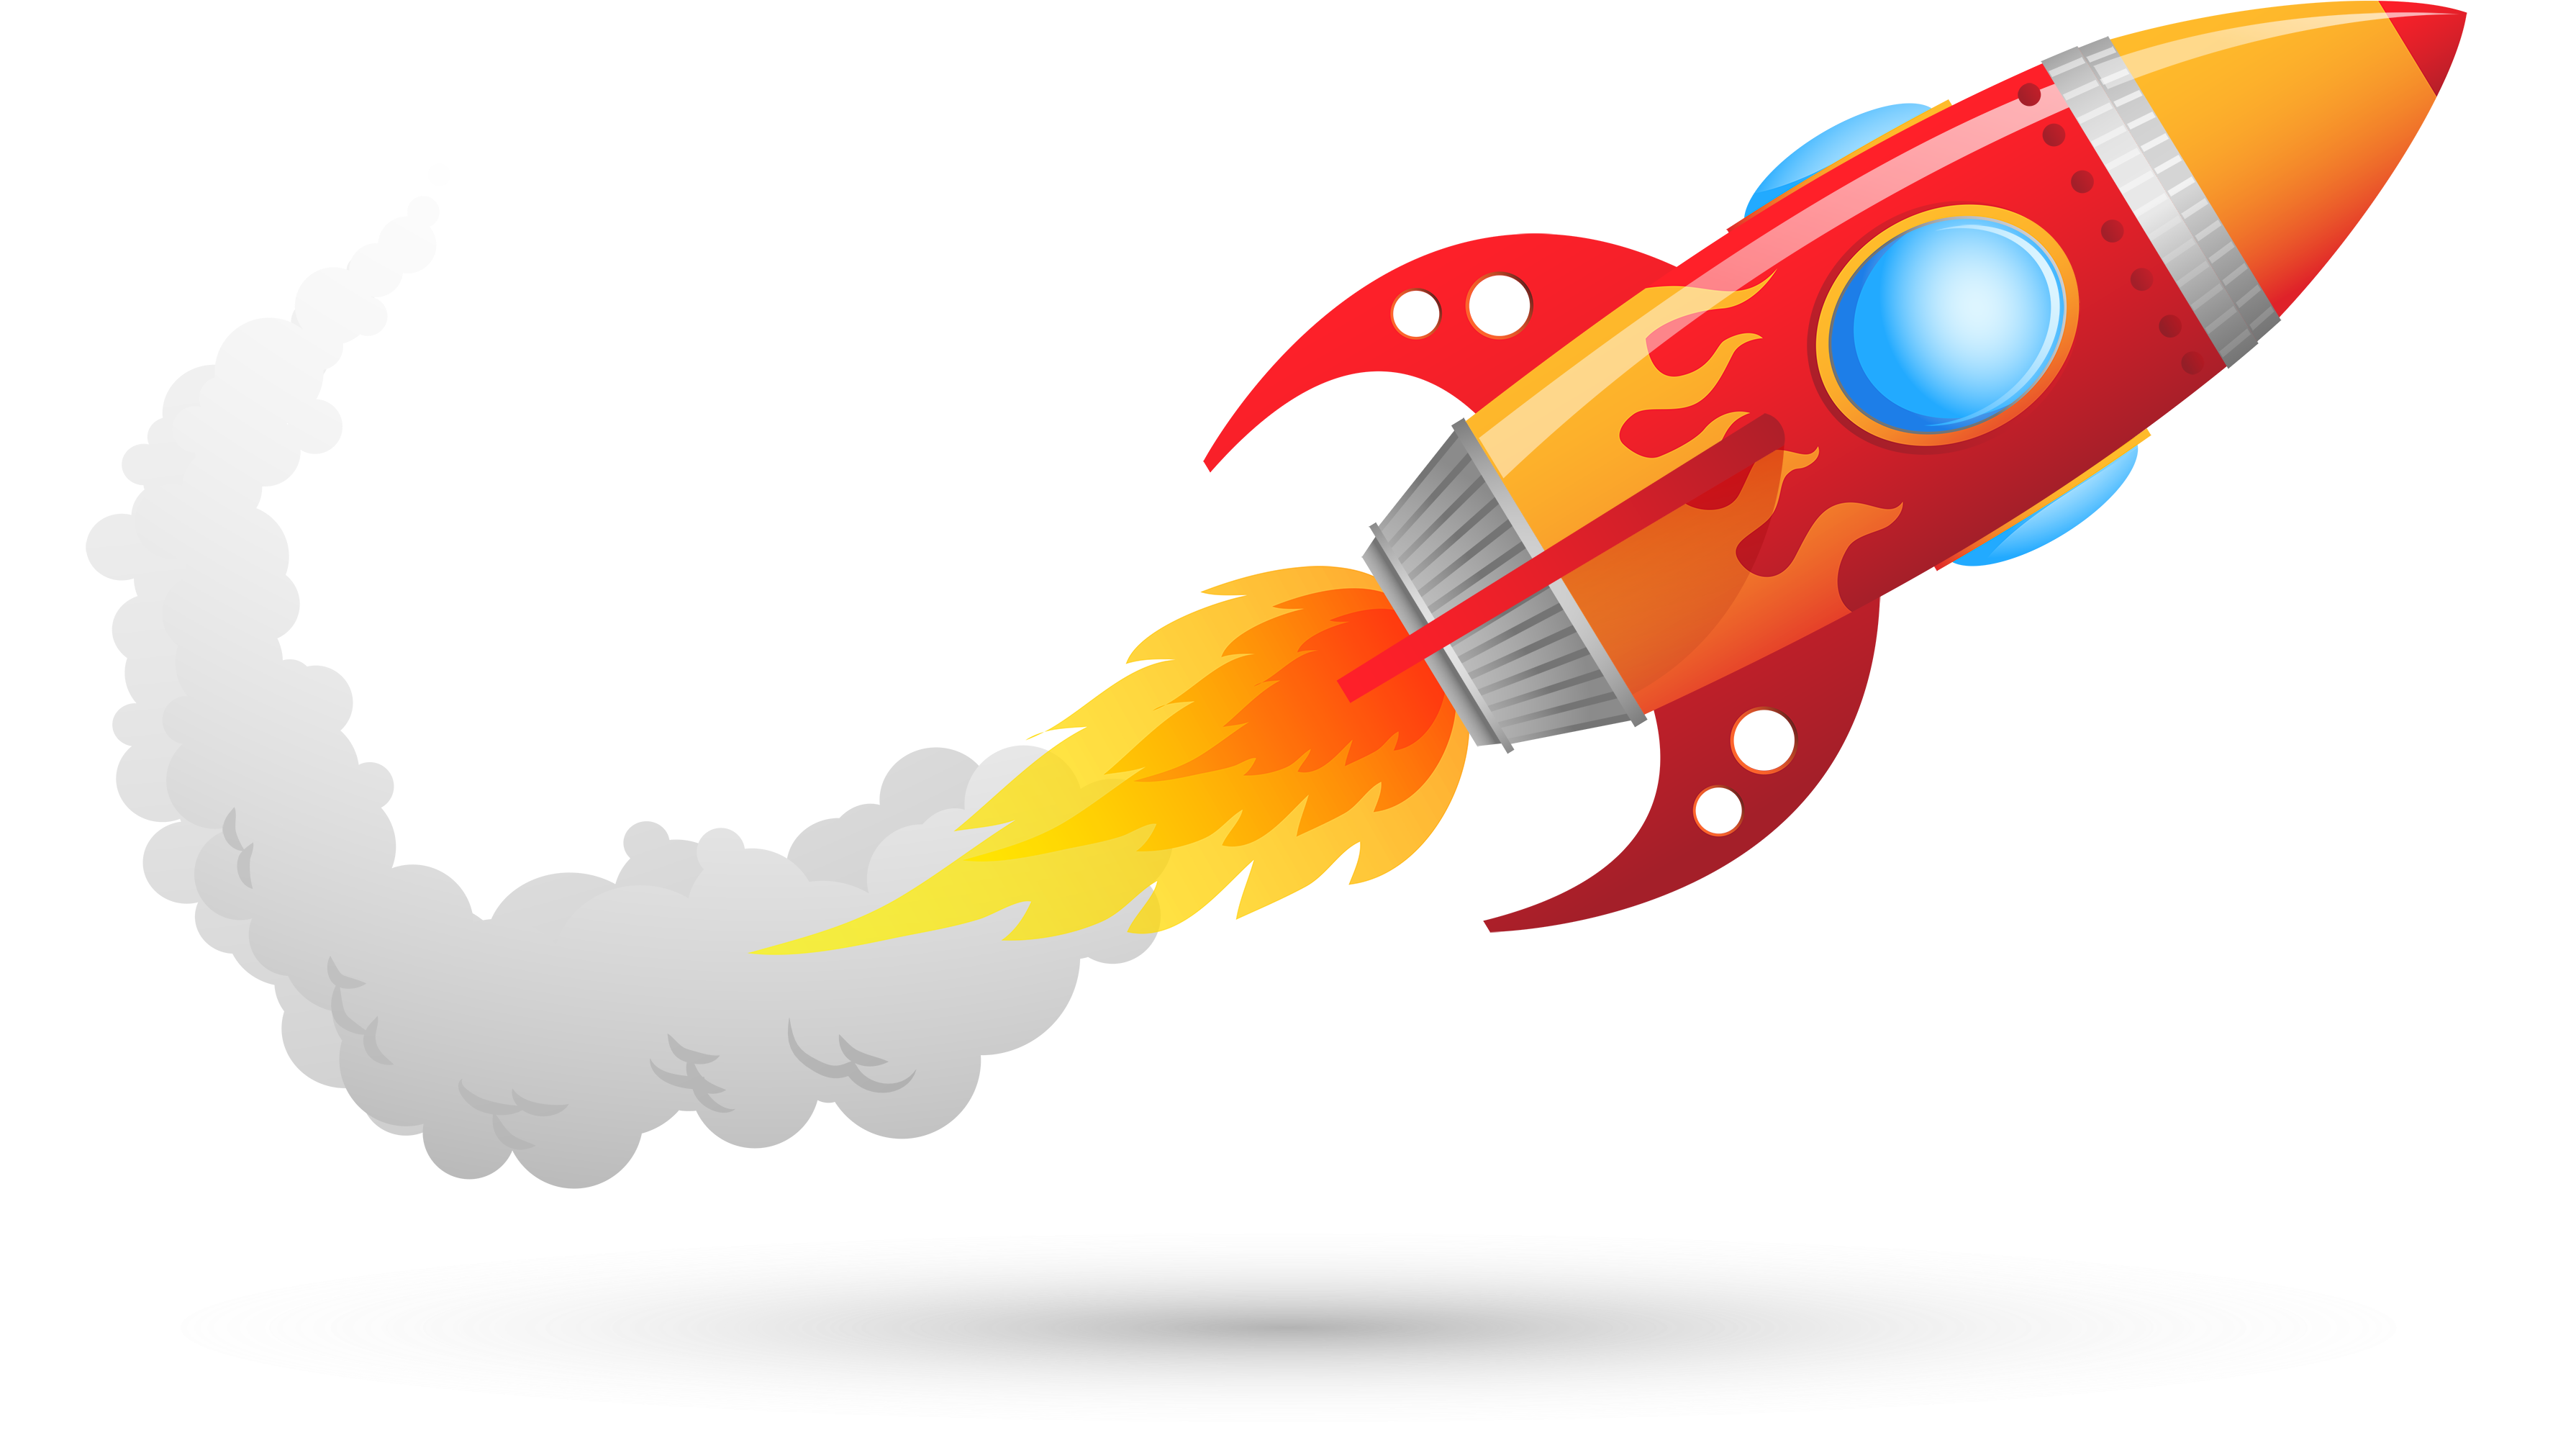 Rocket Clipart Fire Pencil And In Color - Torch In My Room (3651x2000)